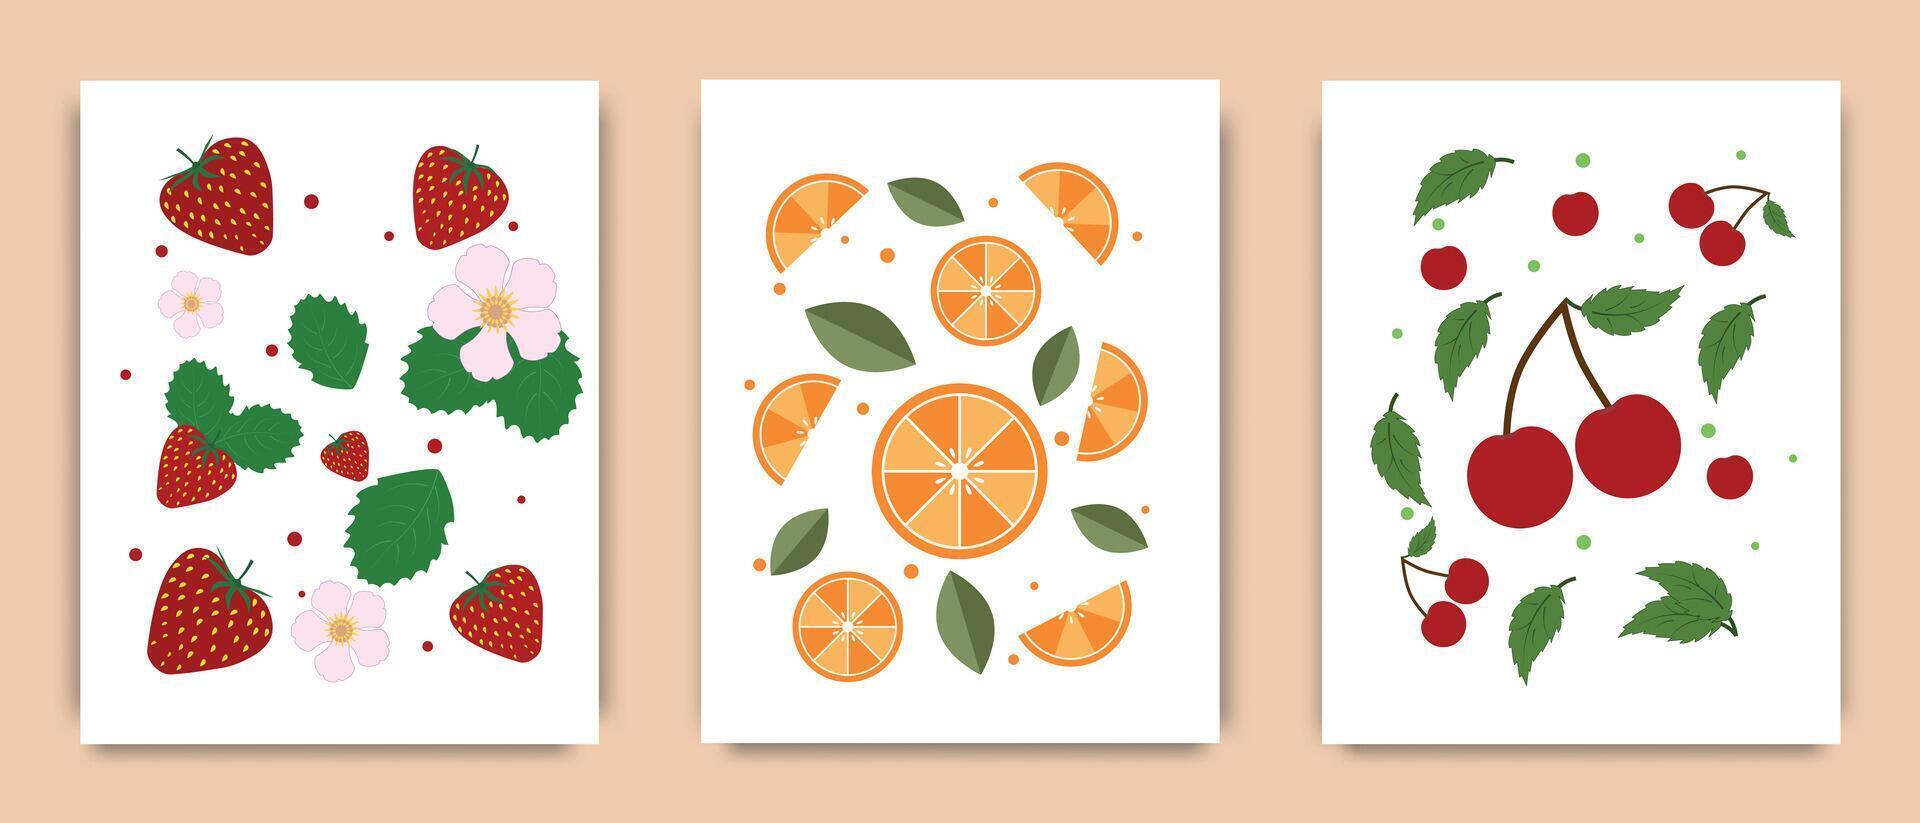 Fruit posters in modern style, wall art. Illustration of strawberry, orange and cherry on a white background. Spring and summer season design for home decor, interior. vector